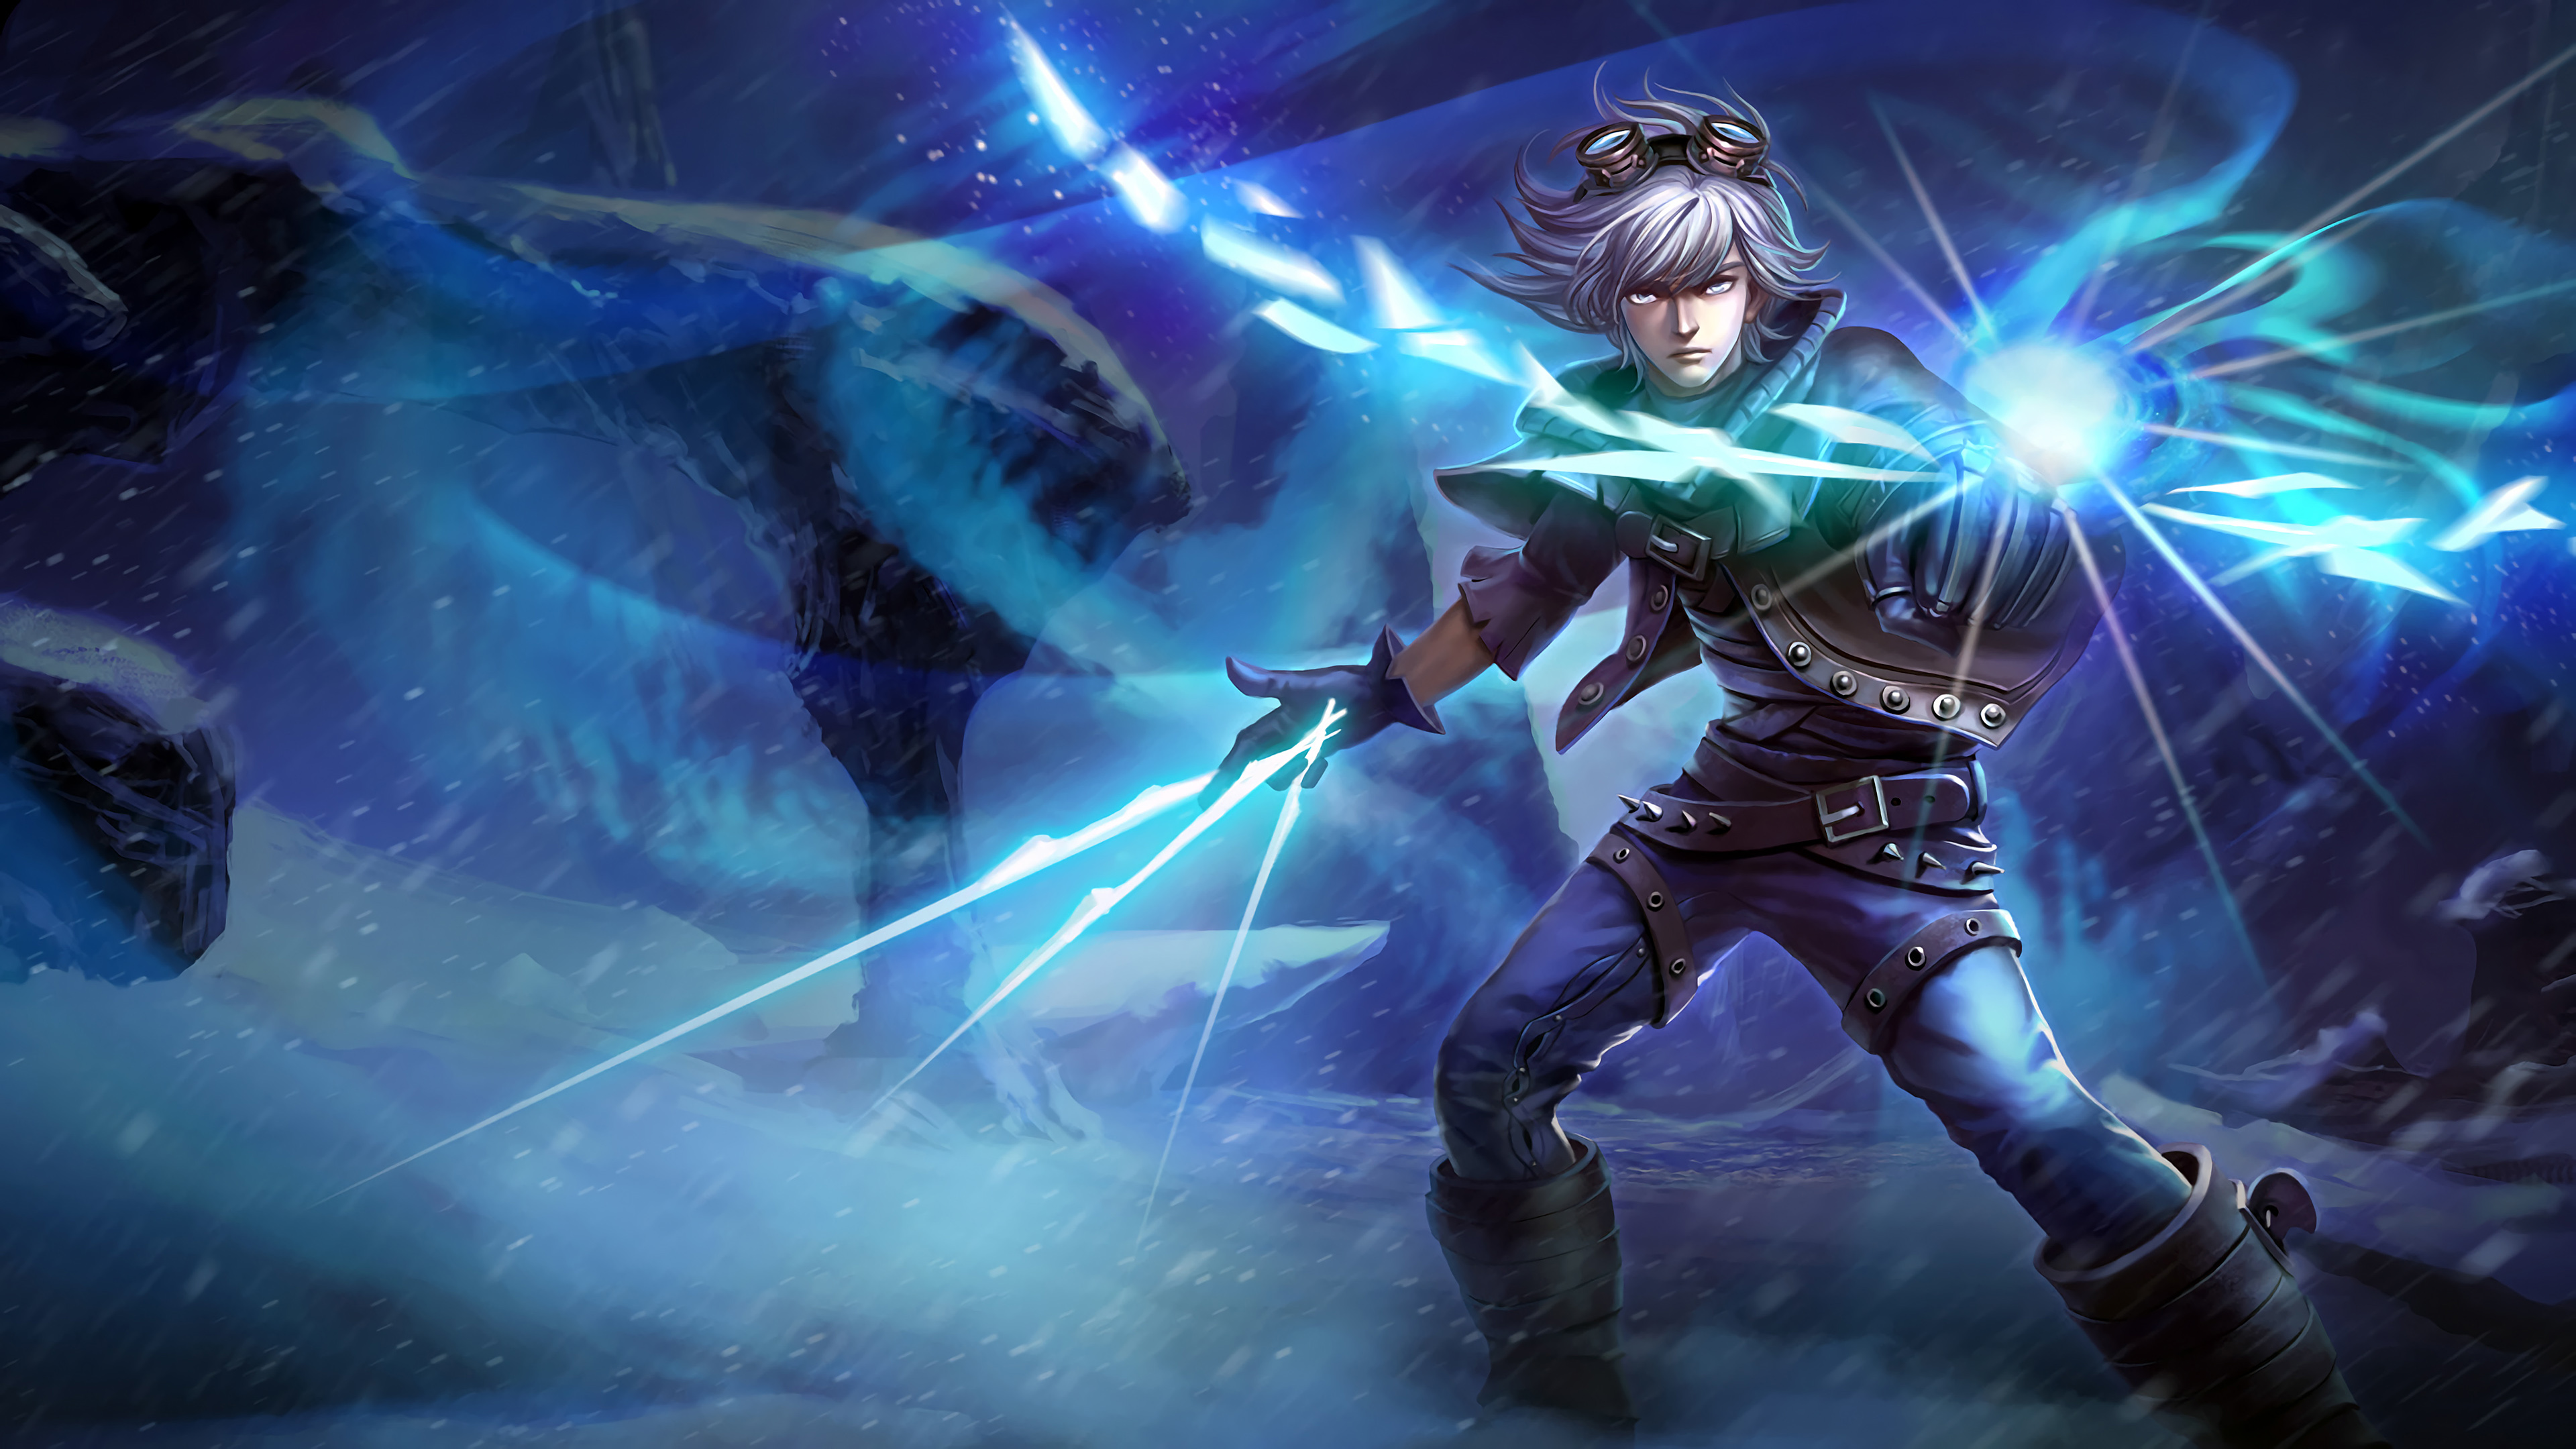 Frosted Ezreal Game Skins League Of Legends Desktop Hd Wallpaper For Pc Tab...